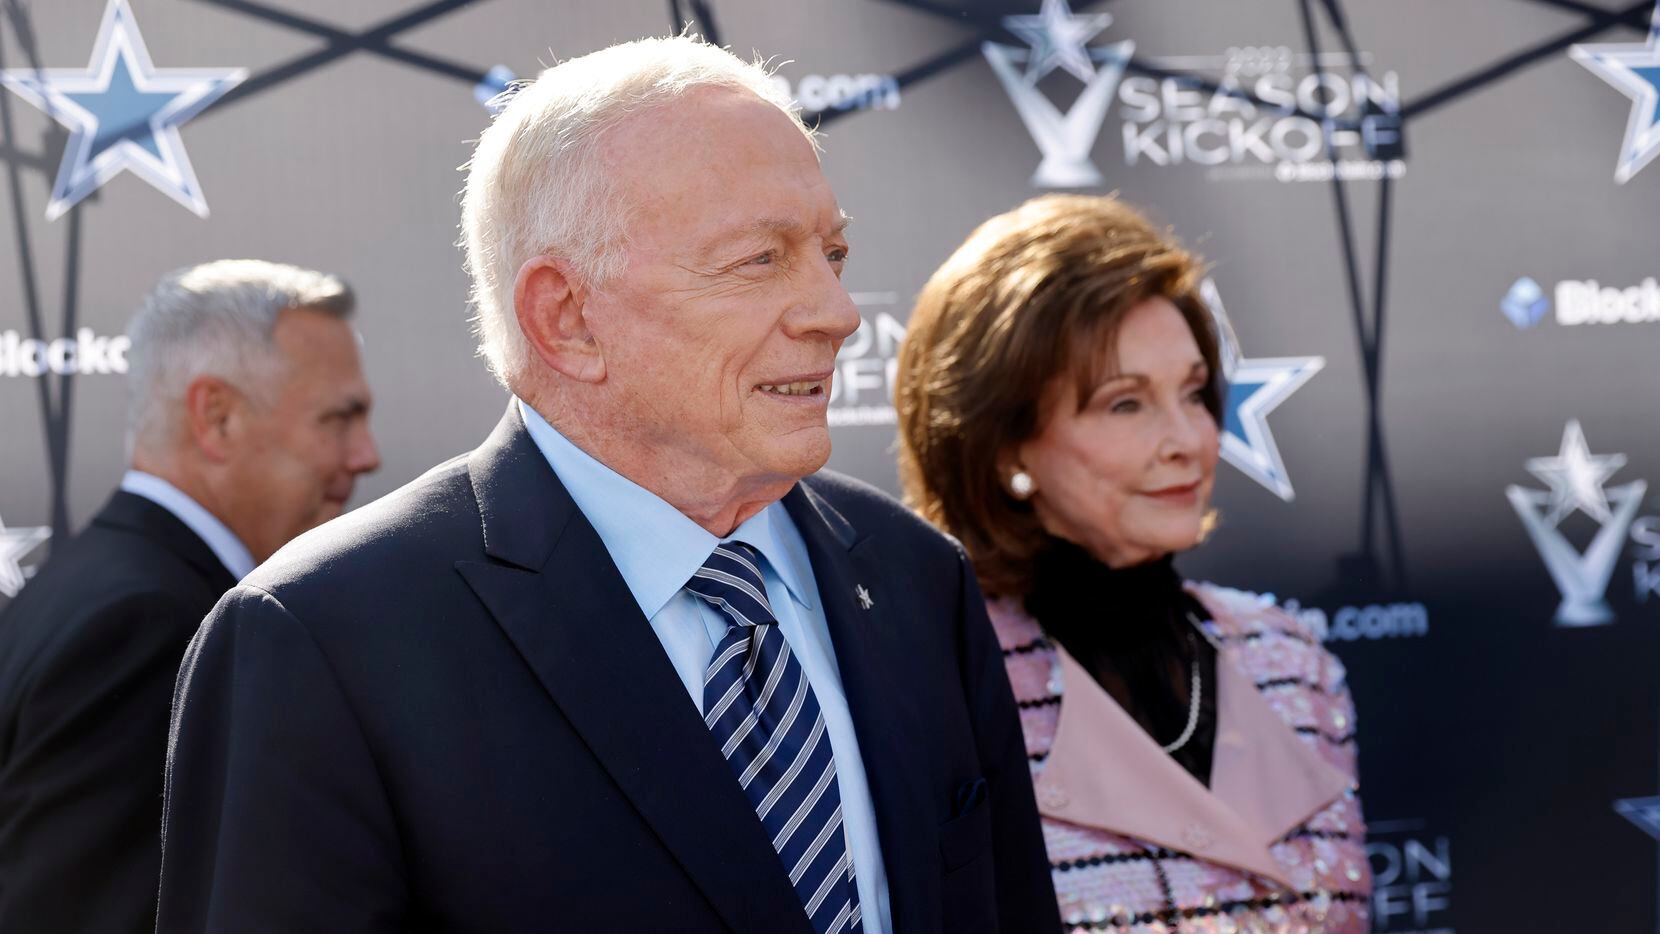 Dallas Cowboys owner Jerry Jones and his wife Gene arrive to the Dallas Cowboys Season...